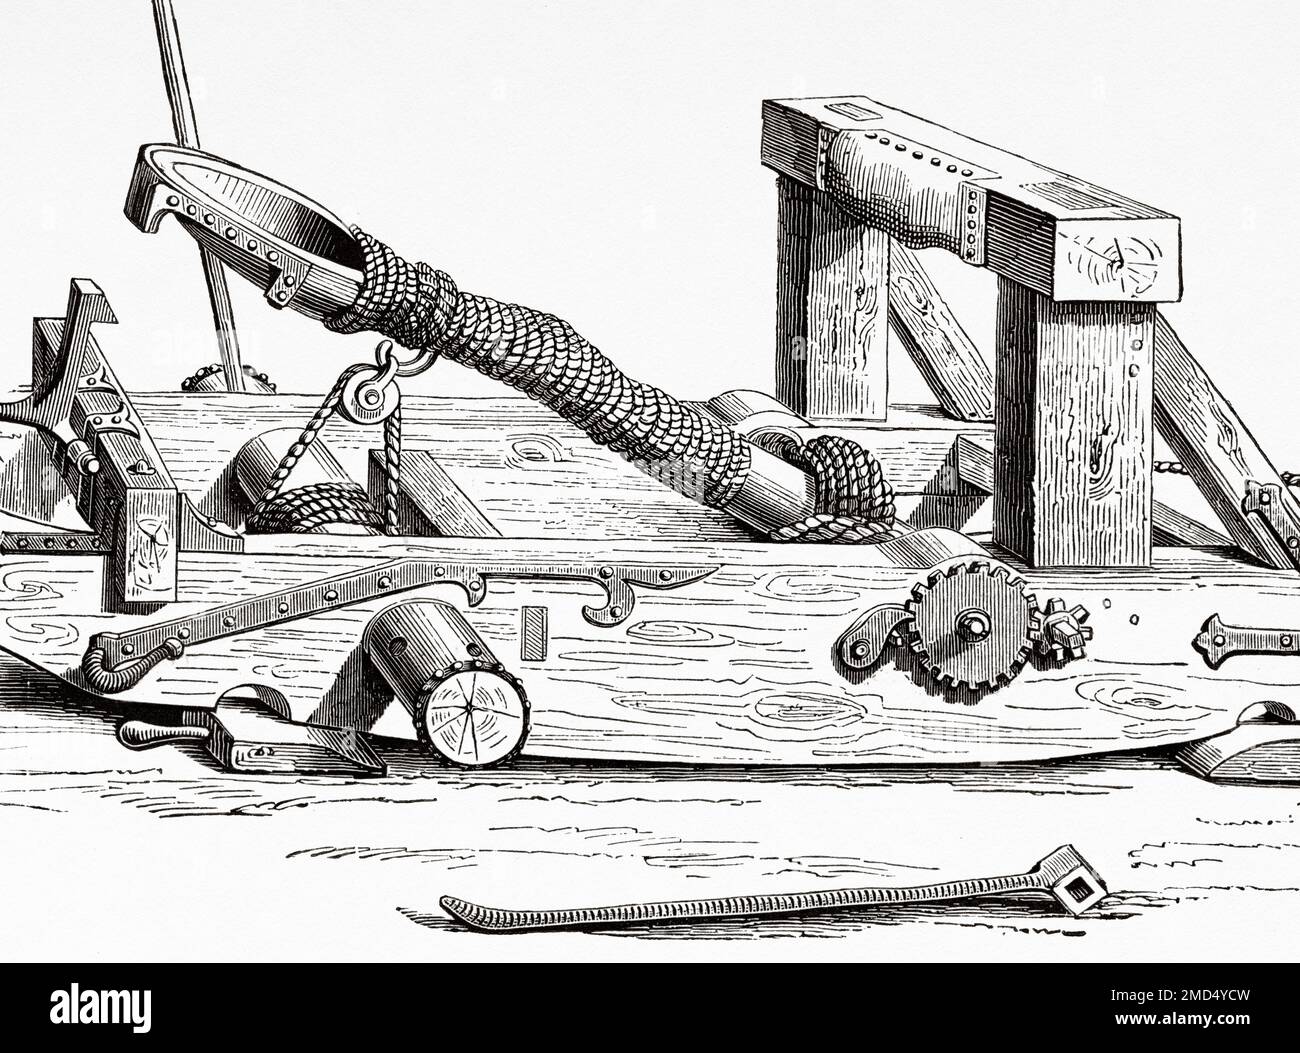 Mangonel, 15th century war machine. Catapult or siege engine used to throw projectiles at the walls of a city or castle. The Arts of the Middle Ages and at the Period of the Renaissance by Paul Lacroix, 1874 Stock Photo